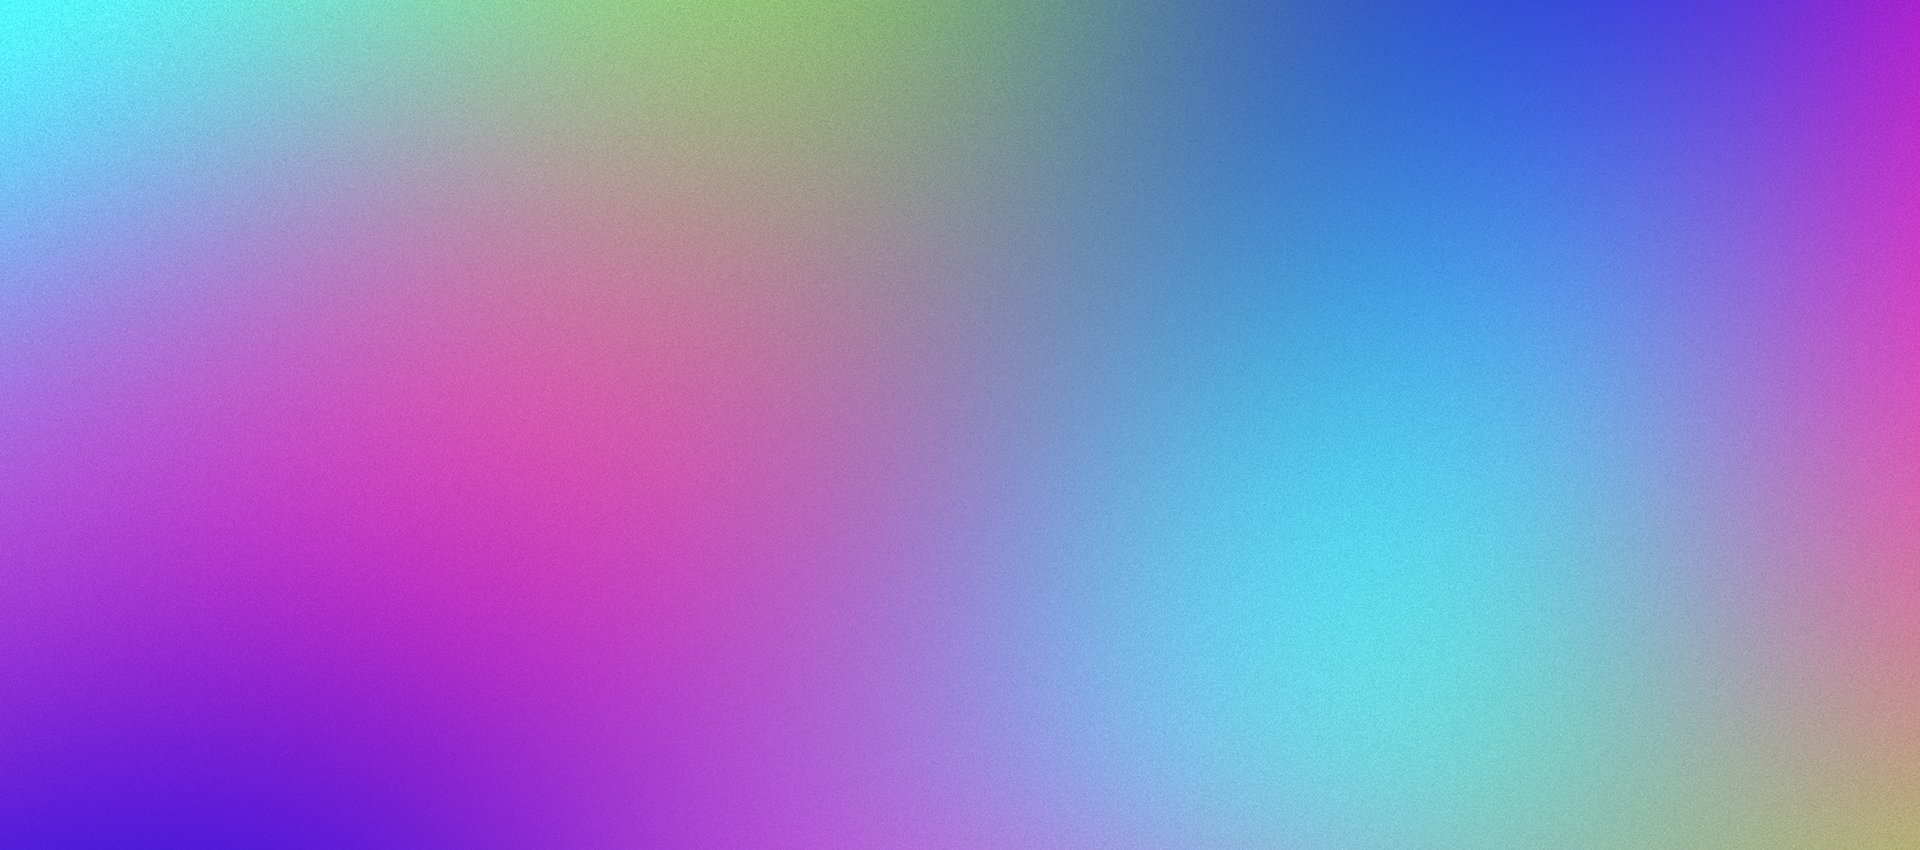 Background banner colors containing purple, yellow and blue hues